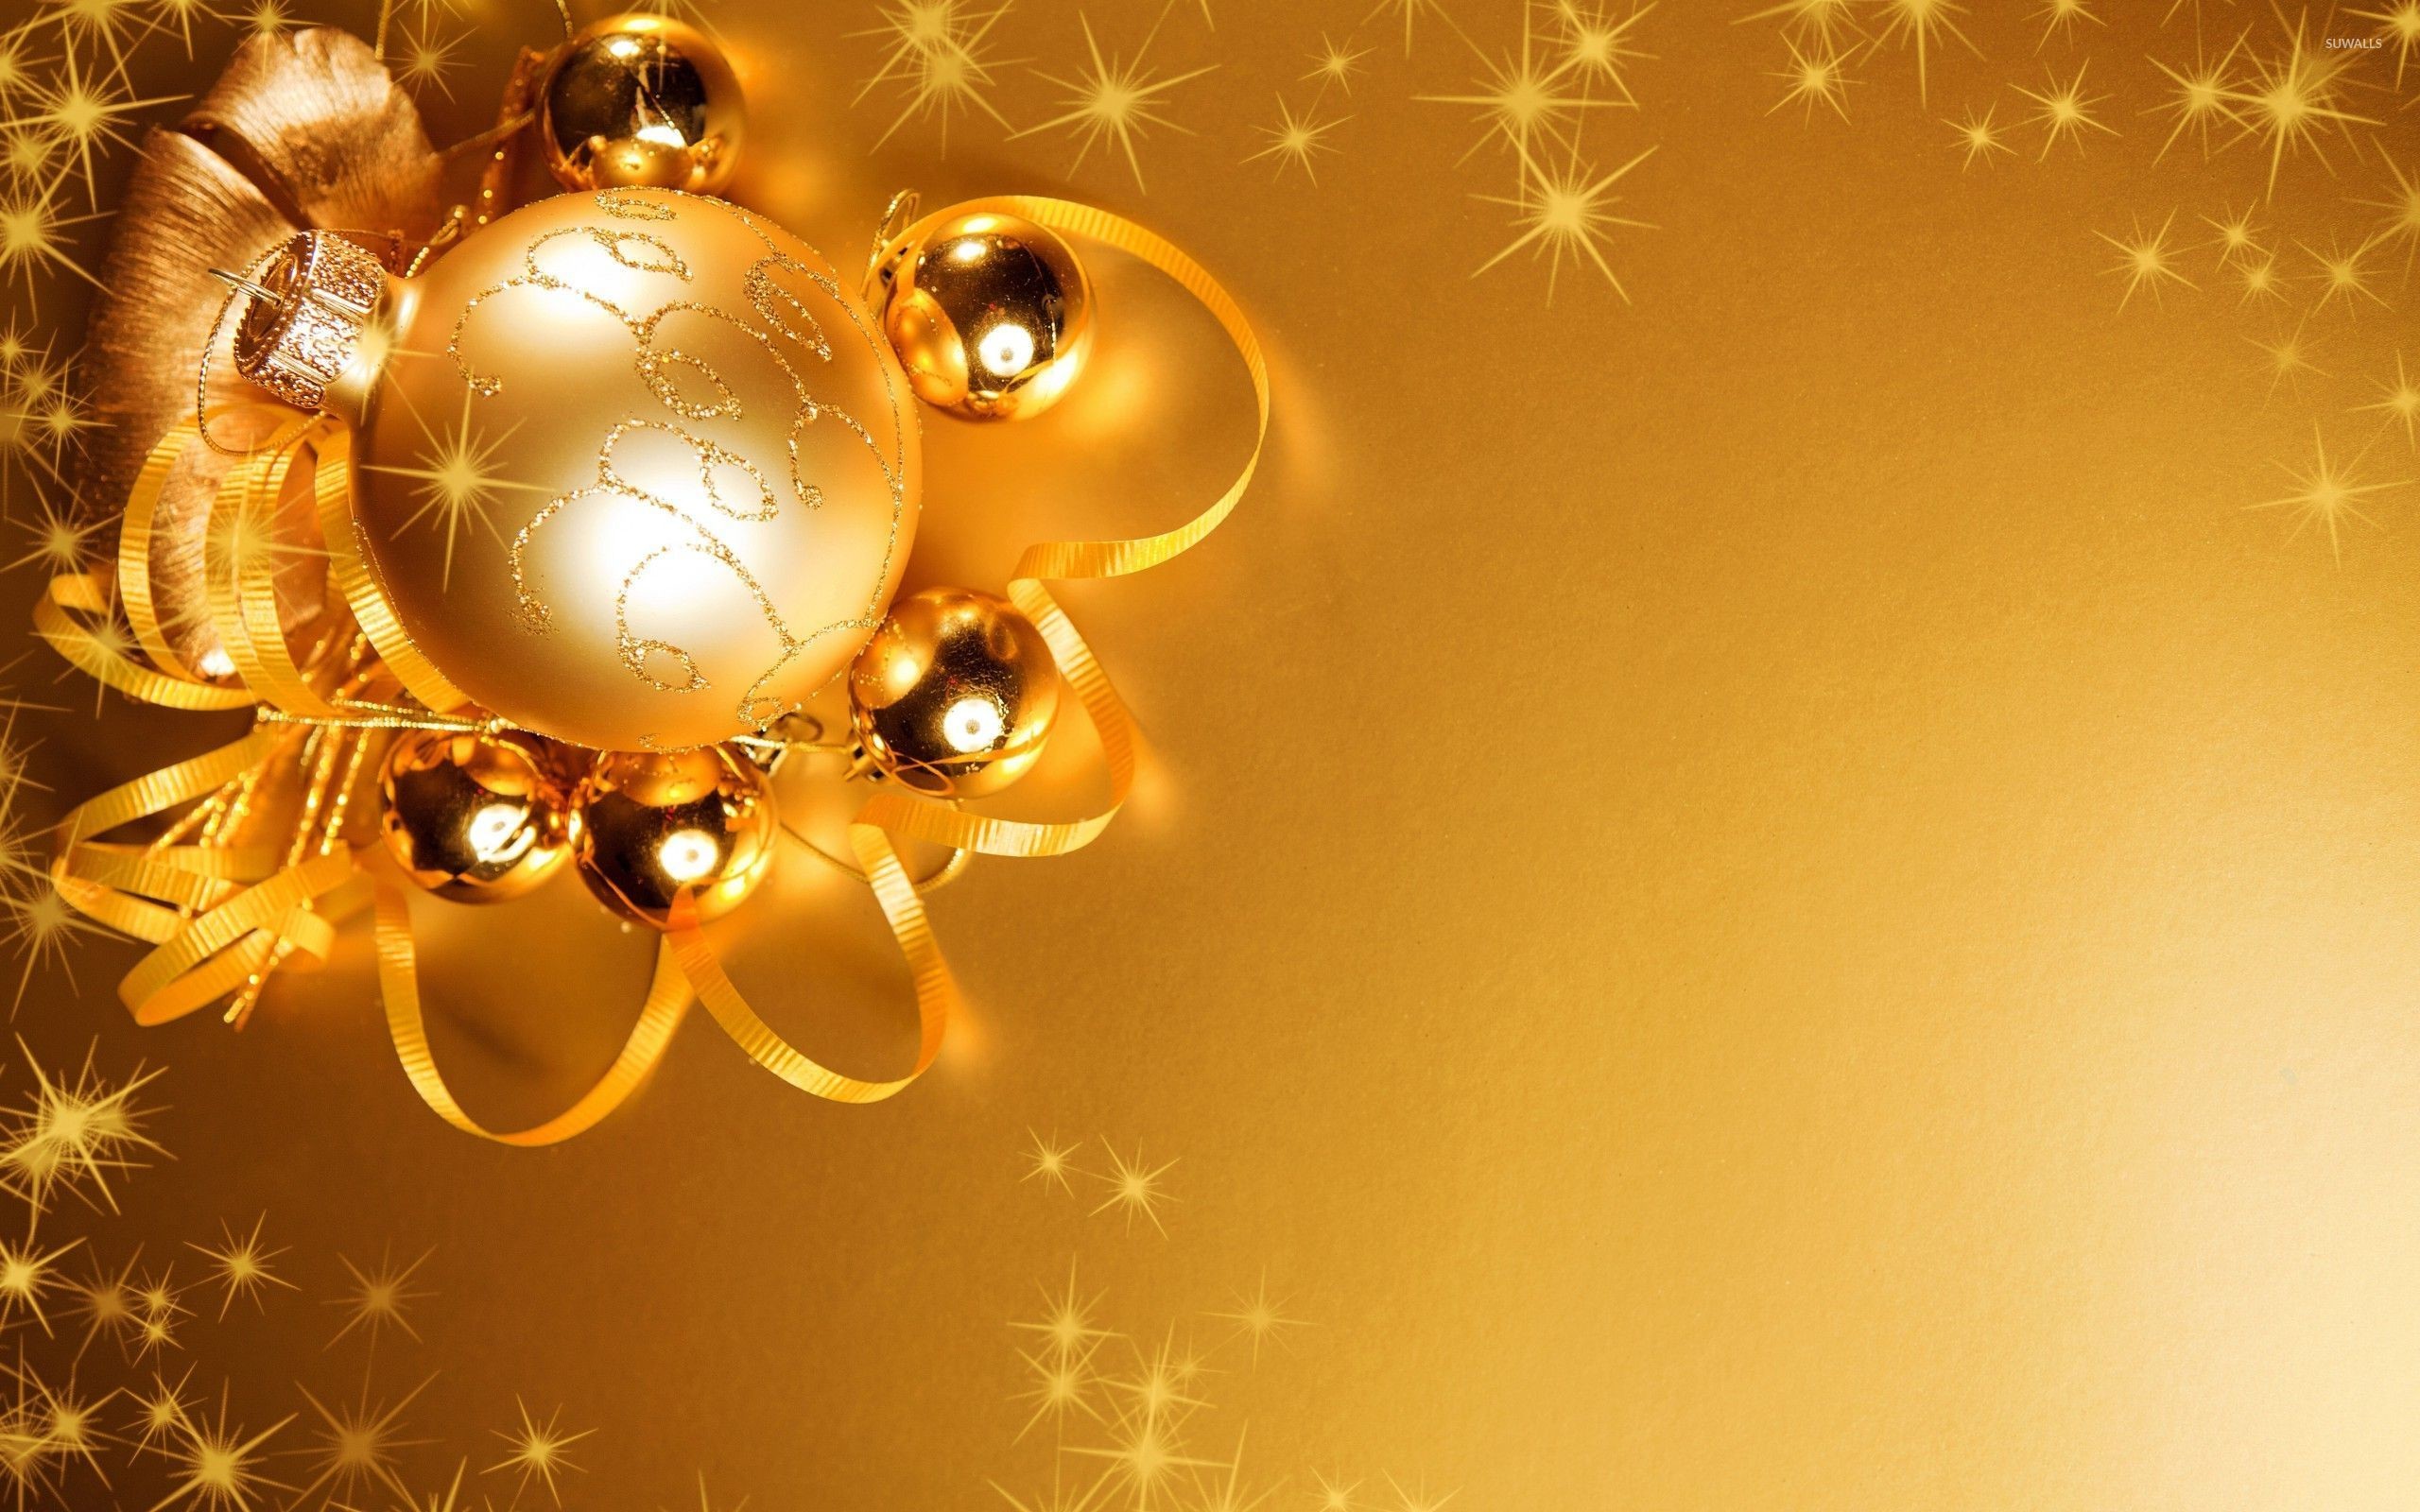 2560x1600 Lights reflecting in the golden Christmas decorations wallpaper   jpg